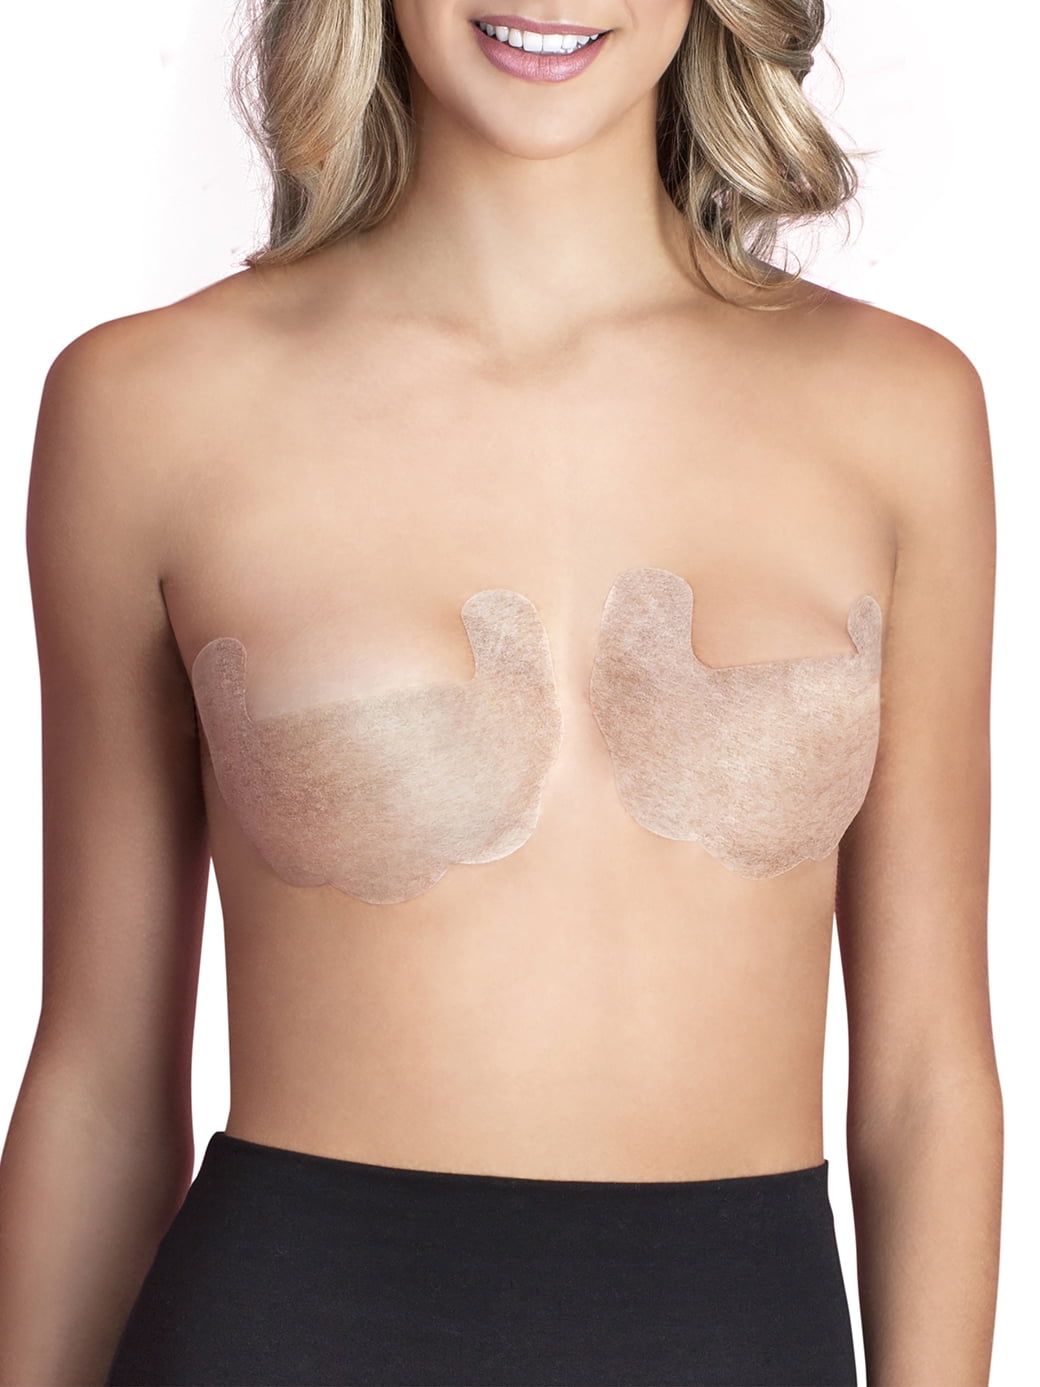 Backless and Strapless Adhesive Bra